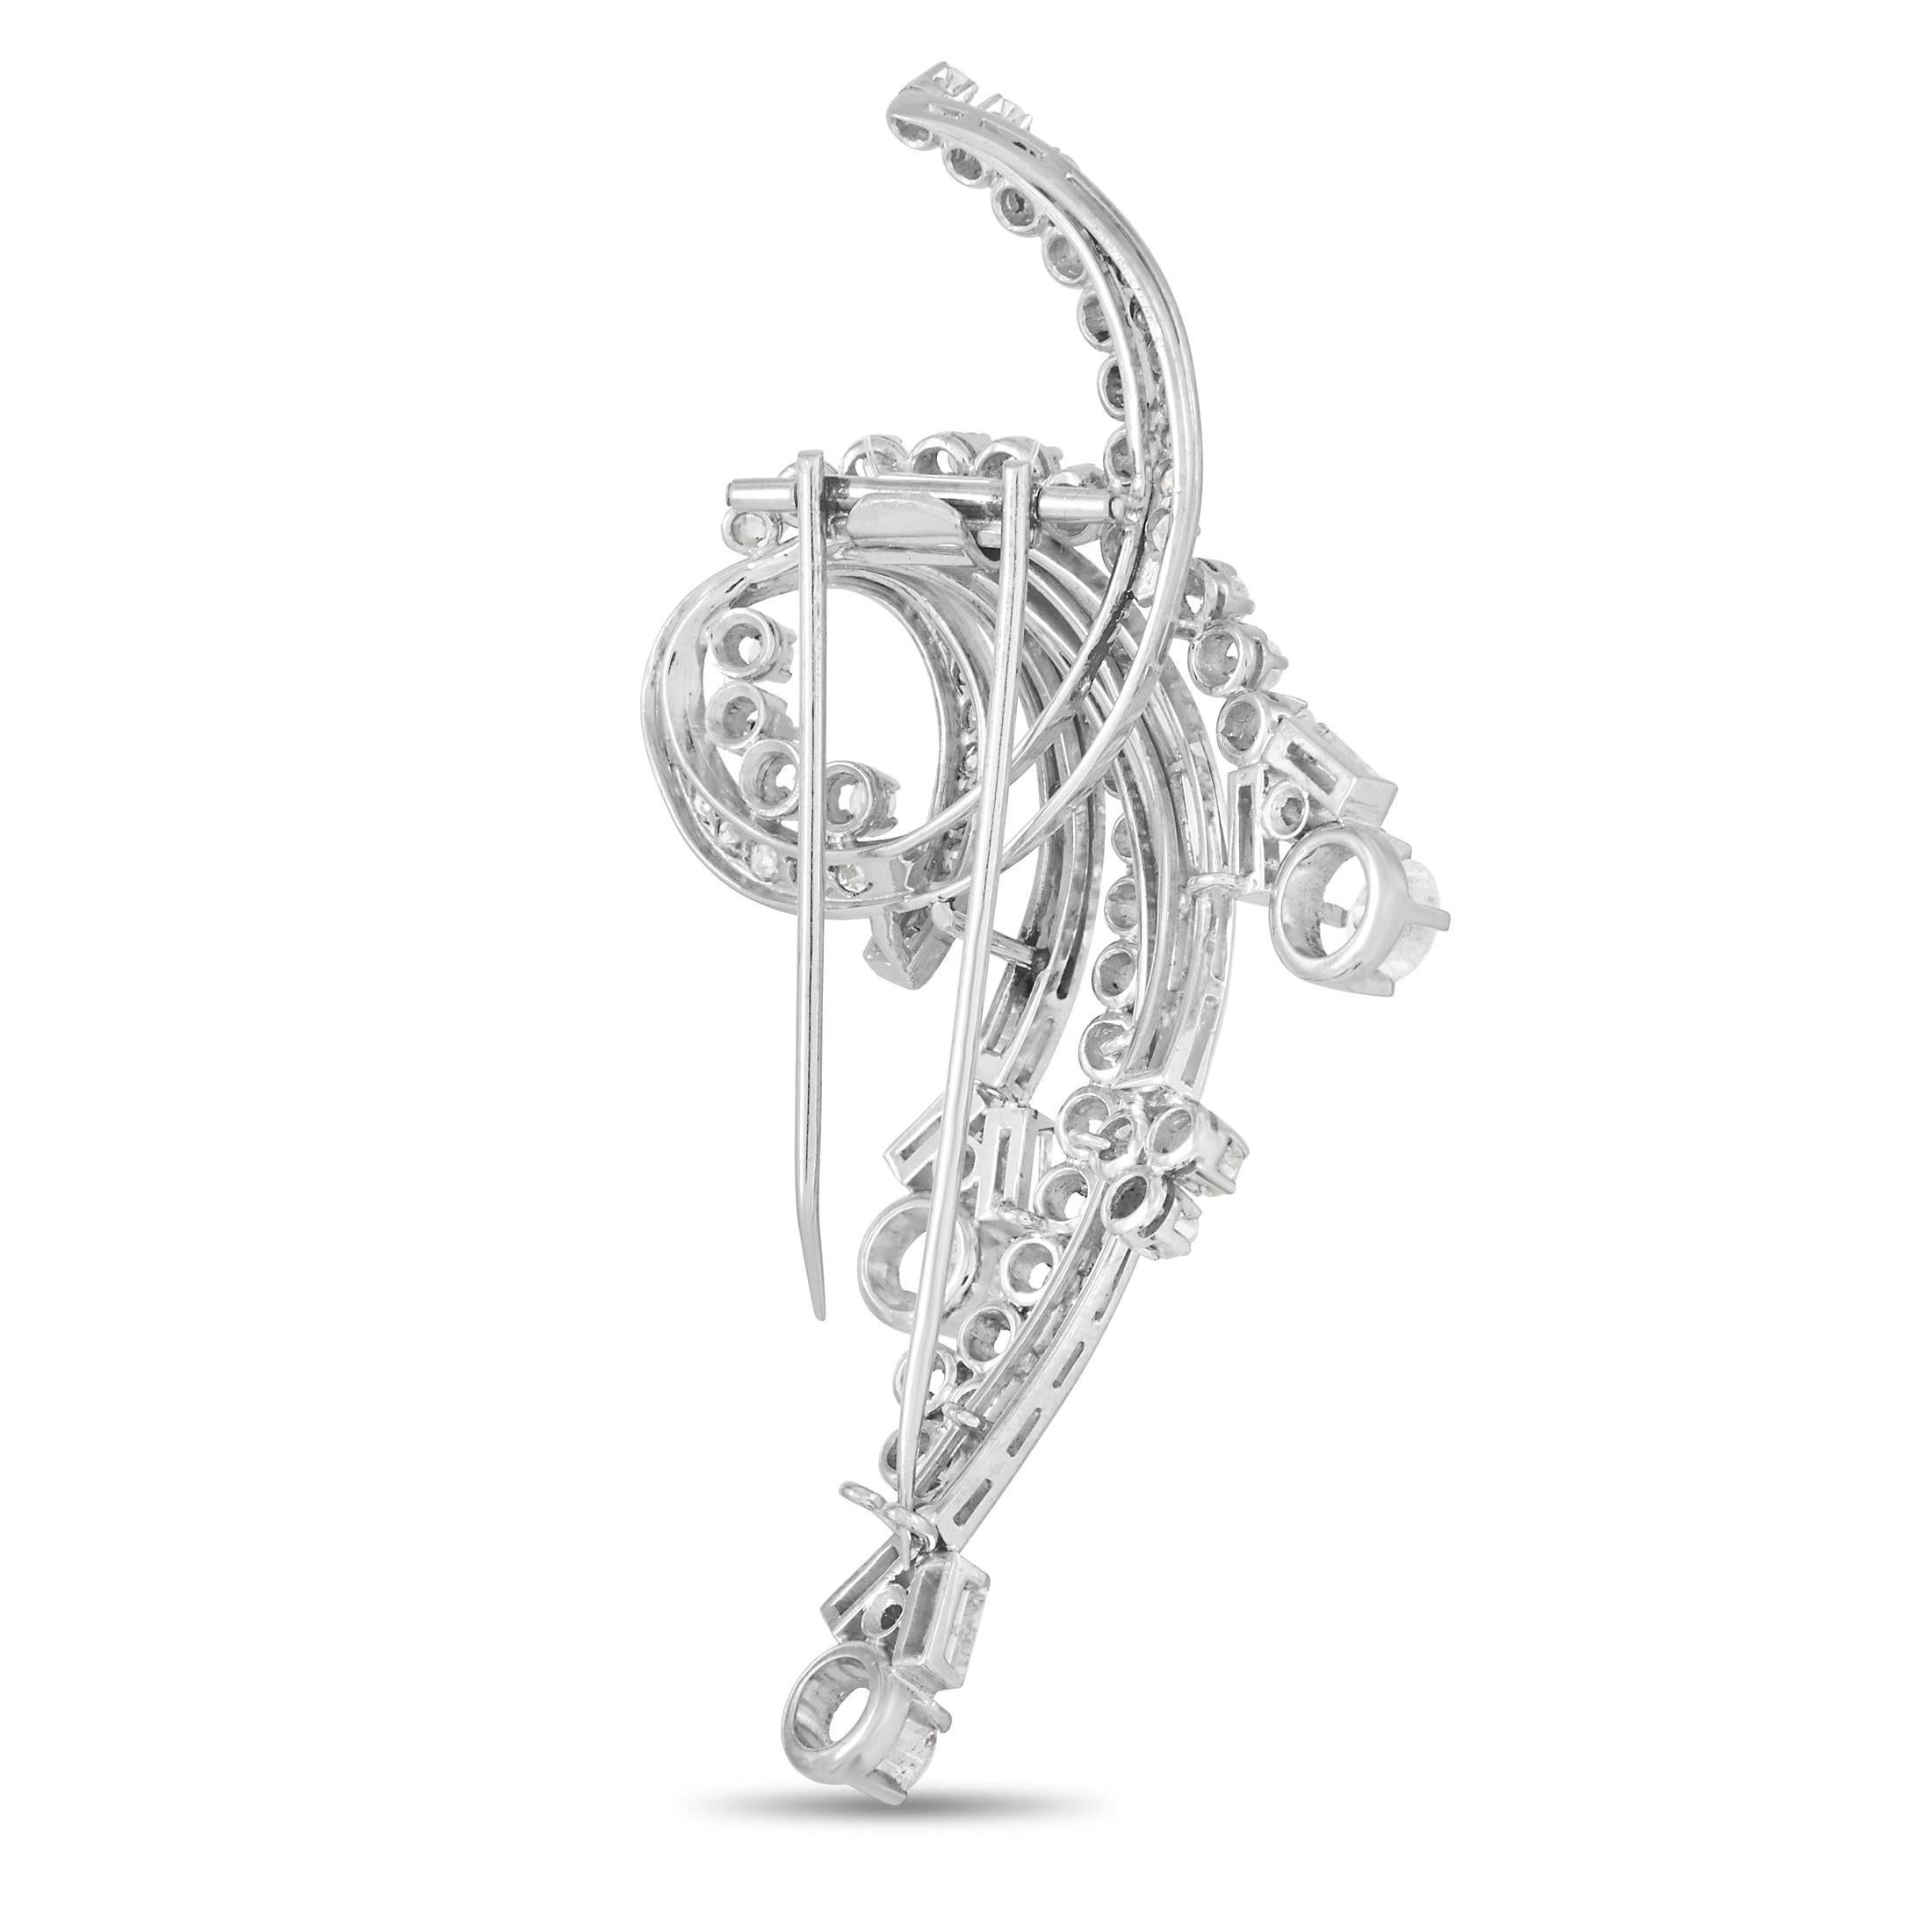 A glistening brooch crafted in solid platinum and embellished with diamonds of different cuts, this LB Exclusive Art Deco Style Diamond Pin would make a dazzling addition to any outfit. It features an abstract floral swirl motif allowing you to wear